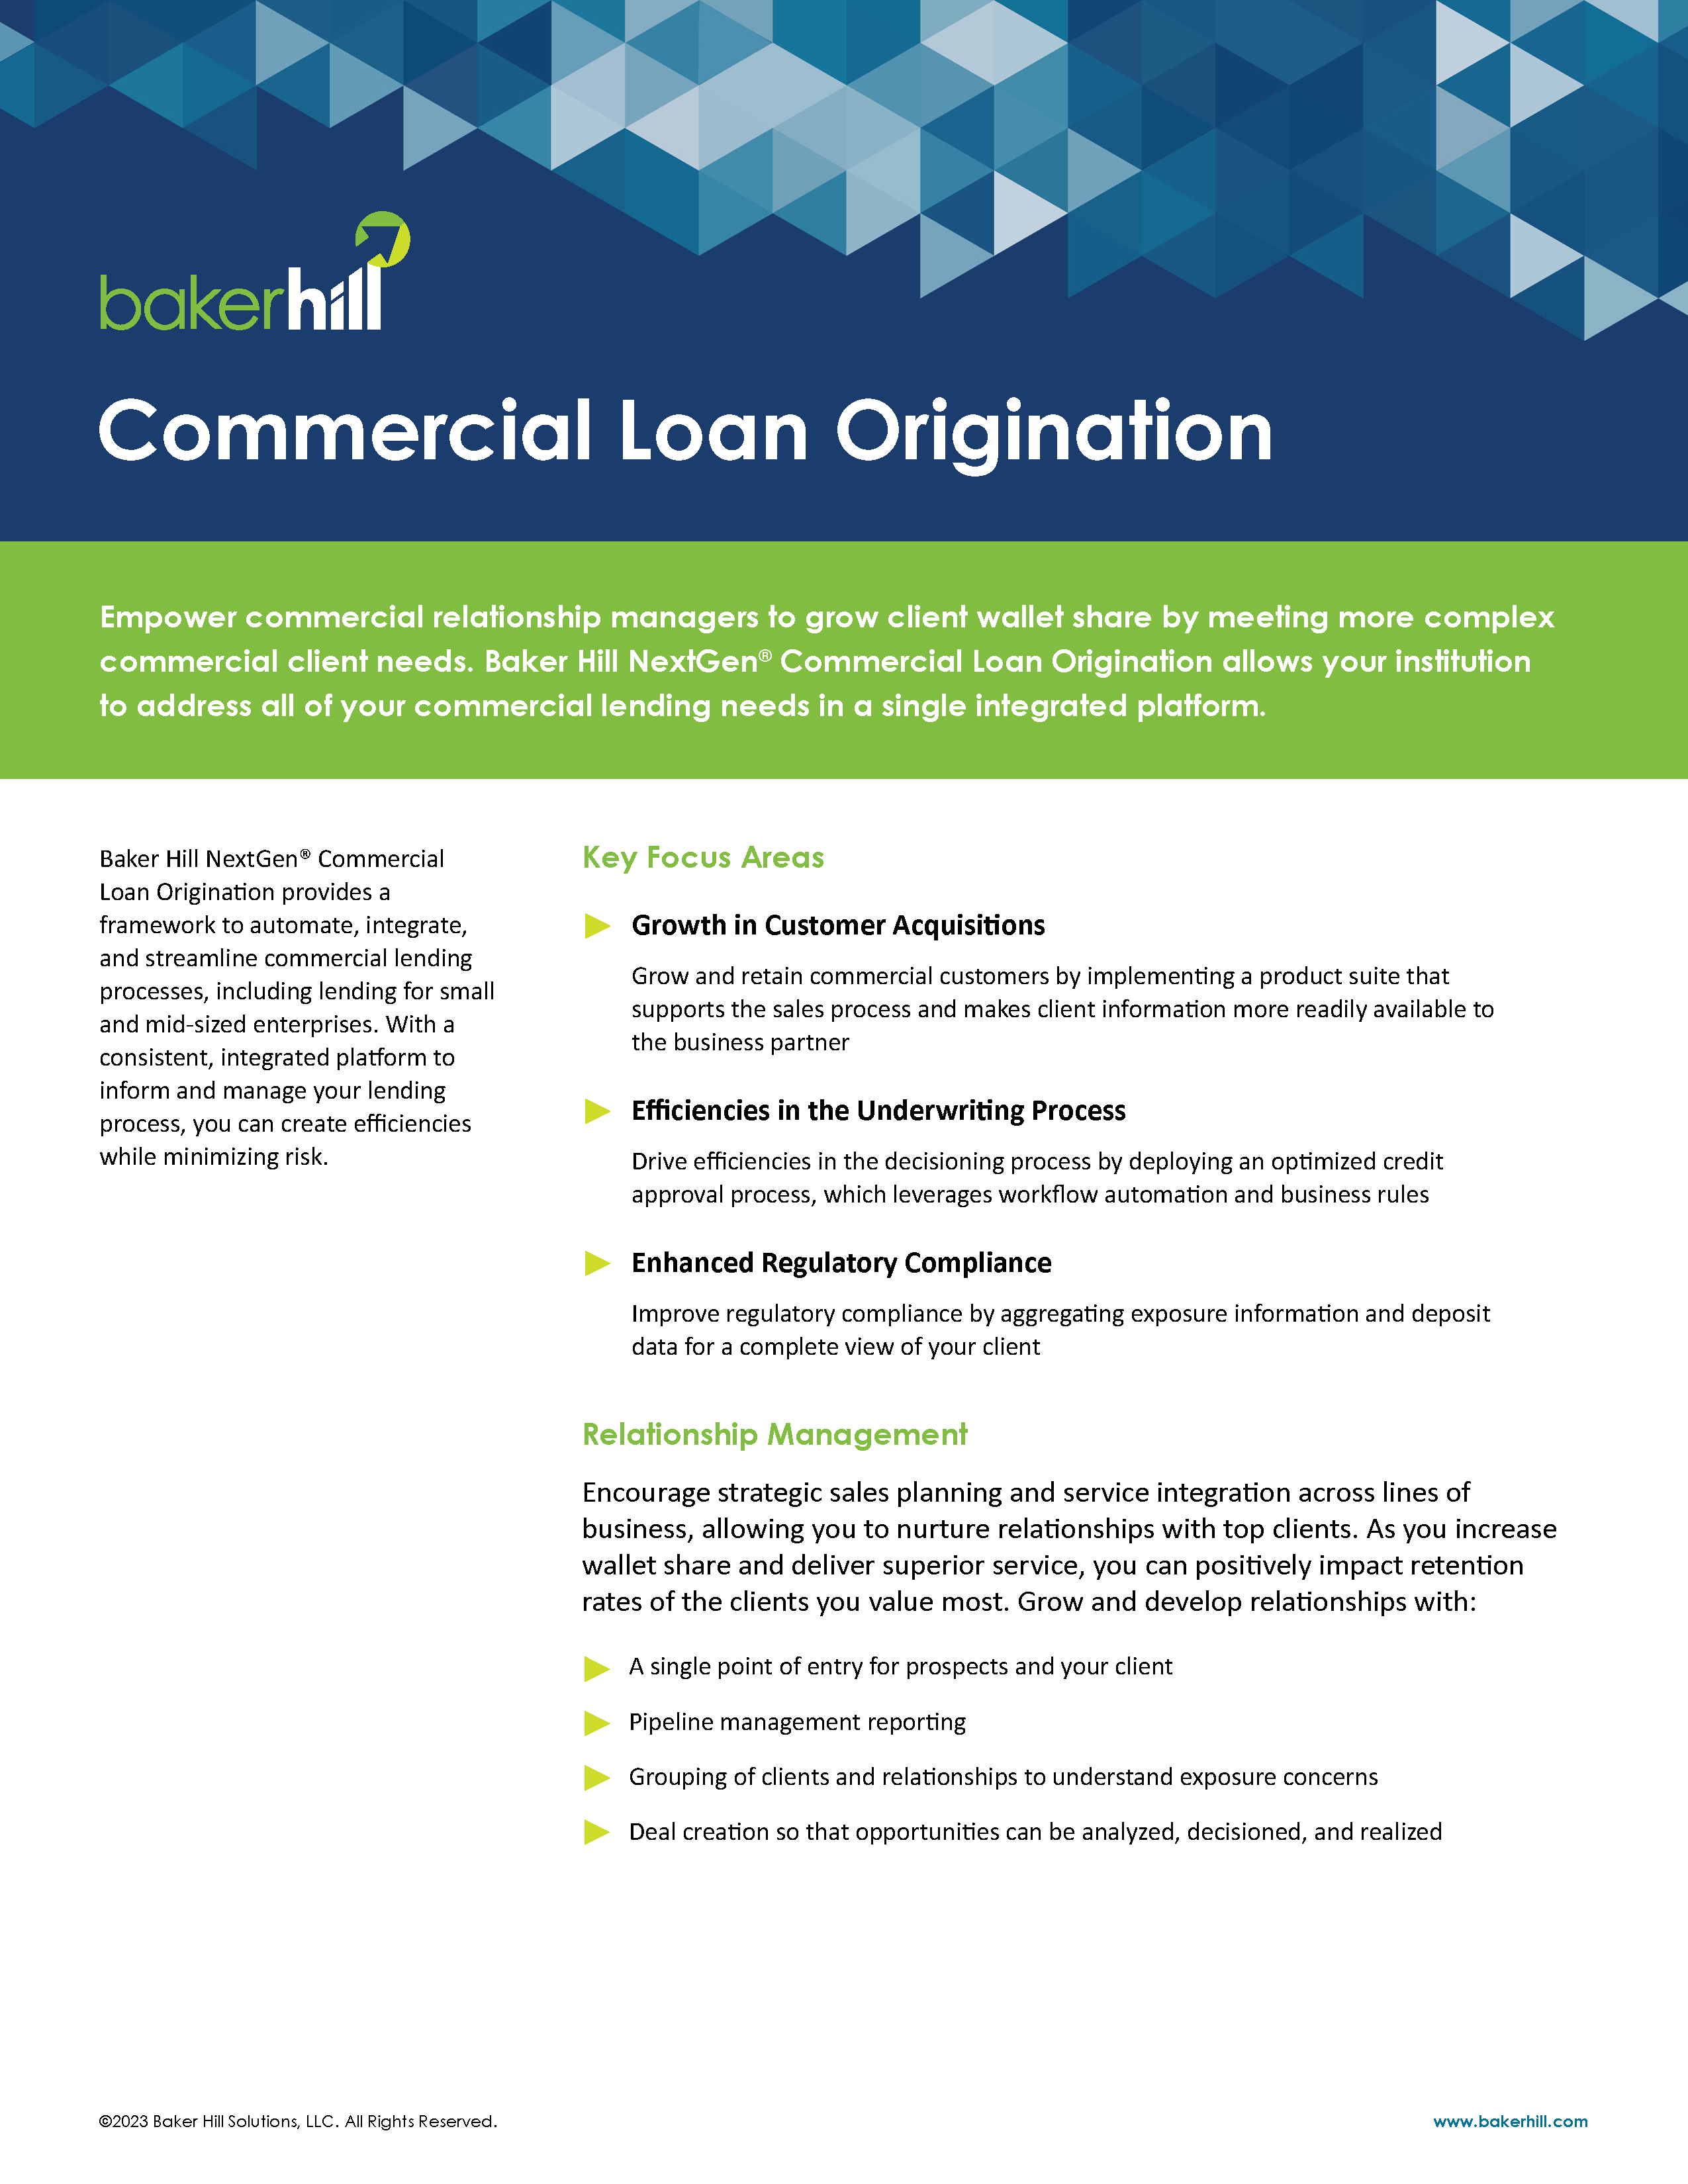 Baker Hill NextGen® Commercial Loan Origination automates the day-to-day tasks of commercial lending so your team can focus on building relationships.